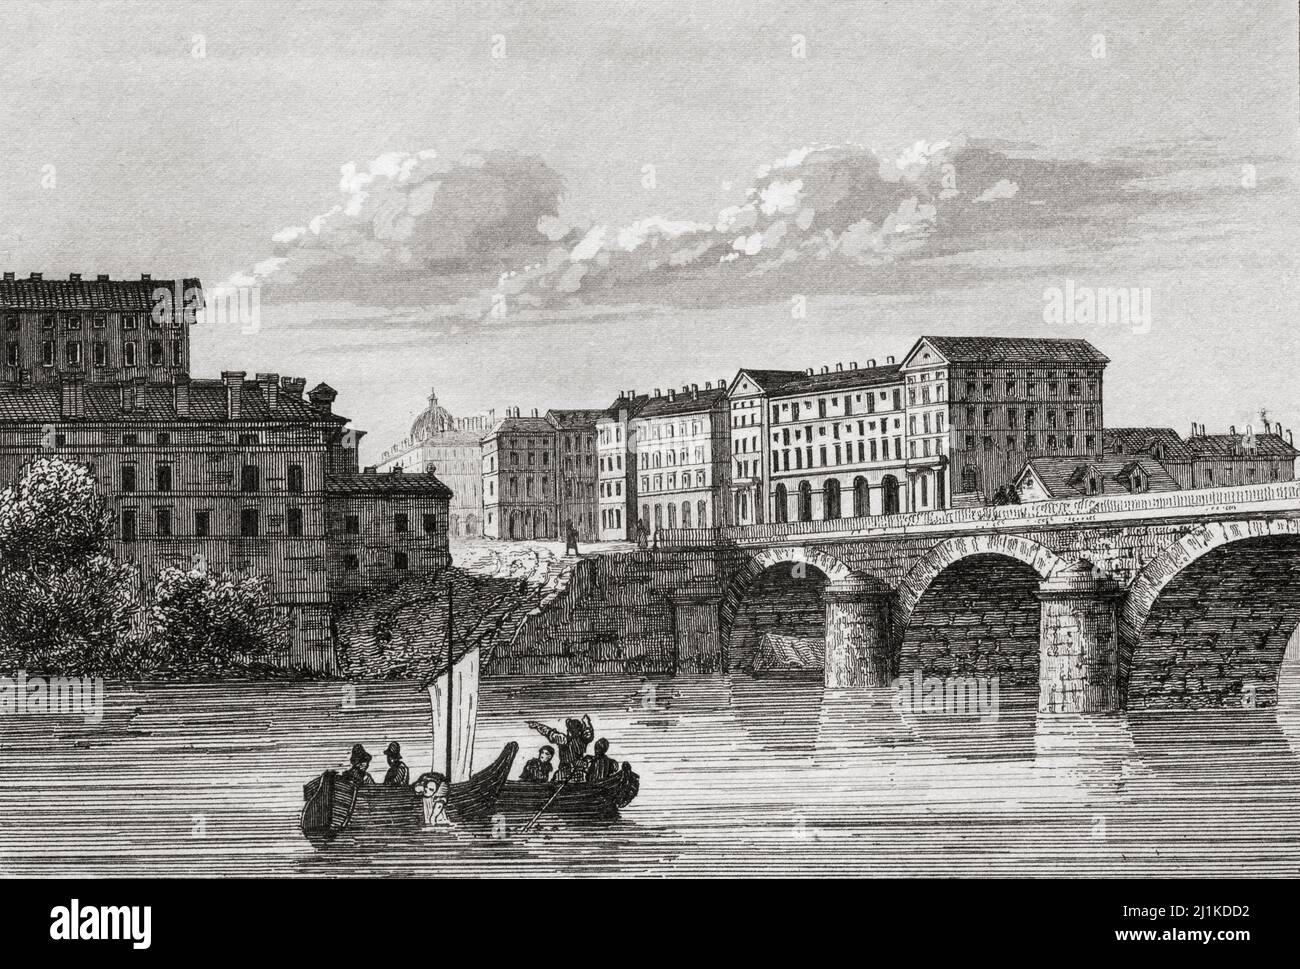 Turin (Torino), Italy. 19th century steel engraving by Lemaitre direxit. Stock Photo